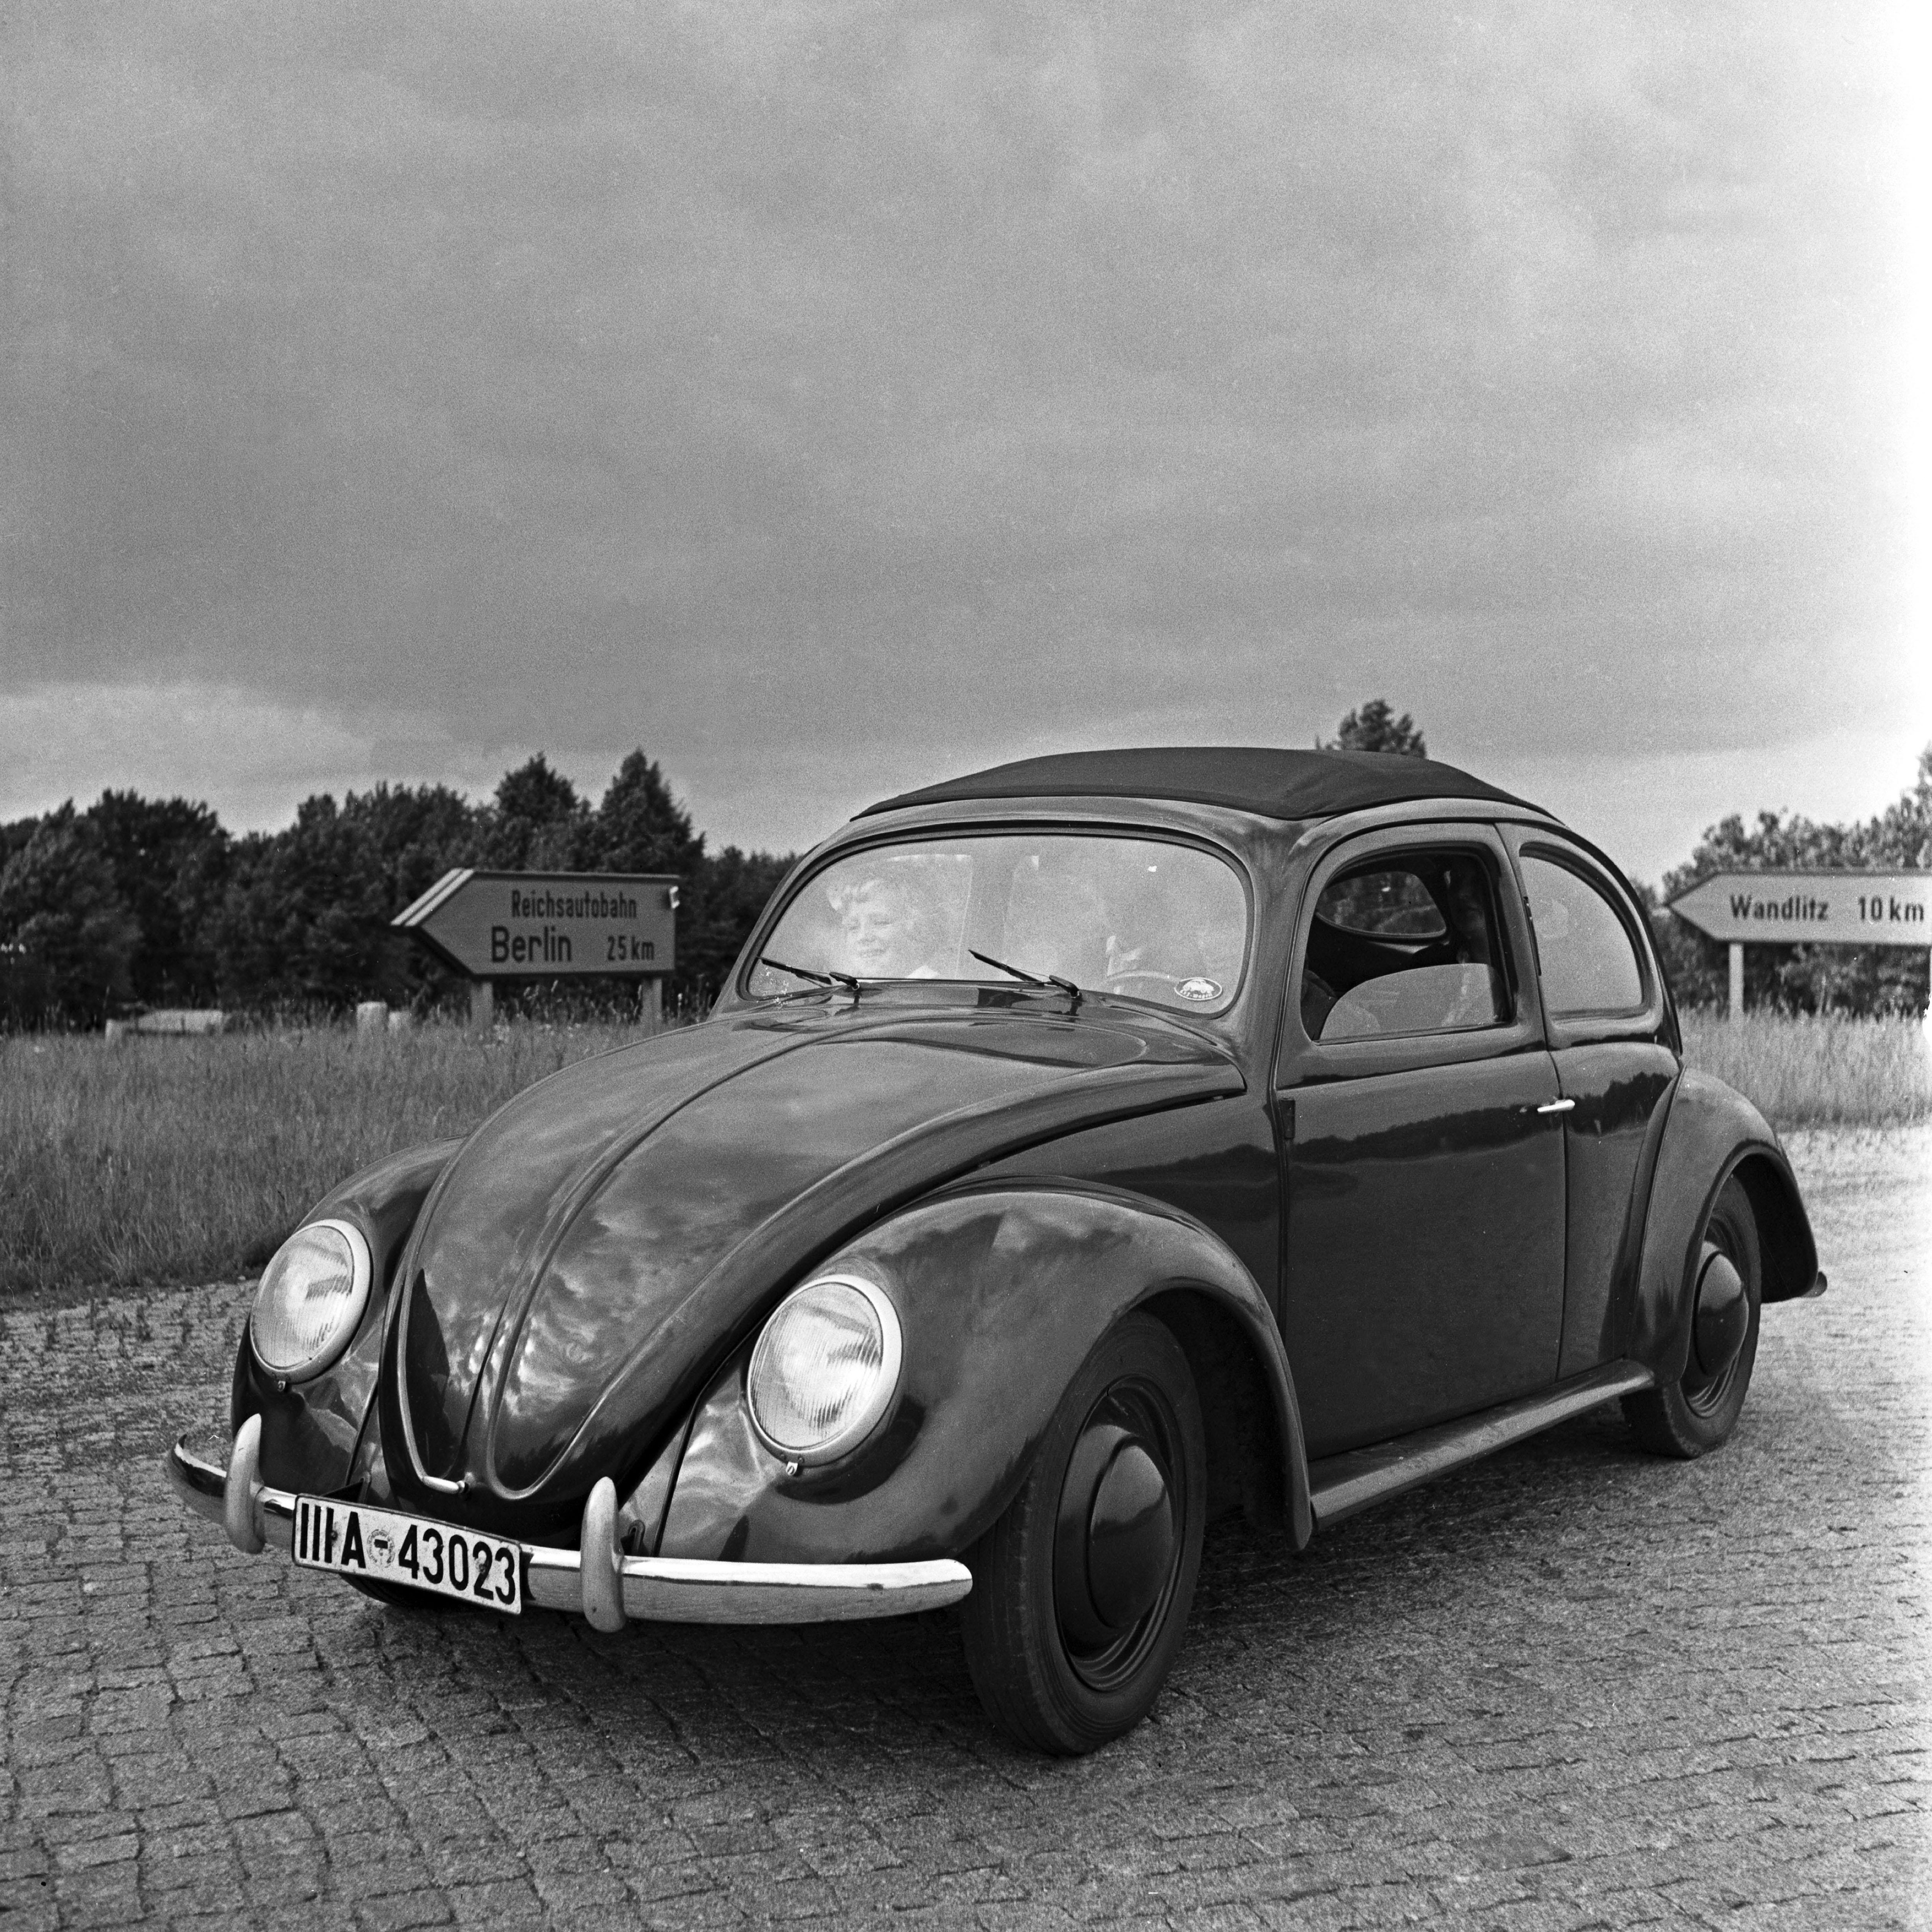 Karl Heinrich Lämmel Black and White Photograph - Volkswagen beetle parking on the streets, Germany 1939 Printed Later 